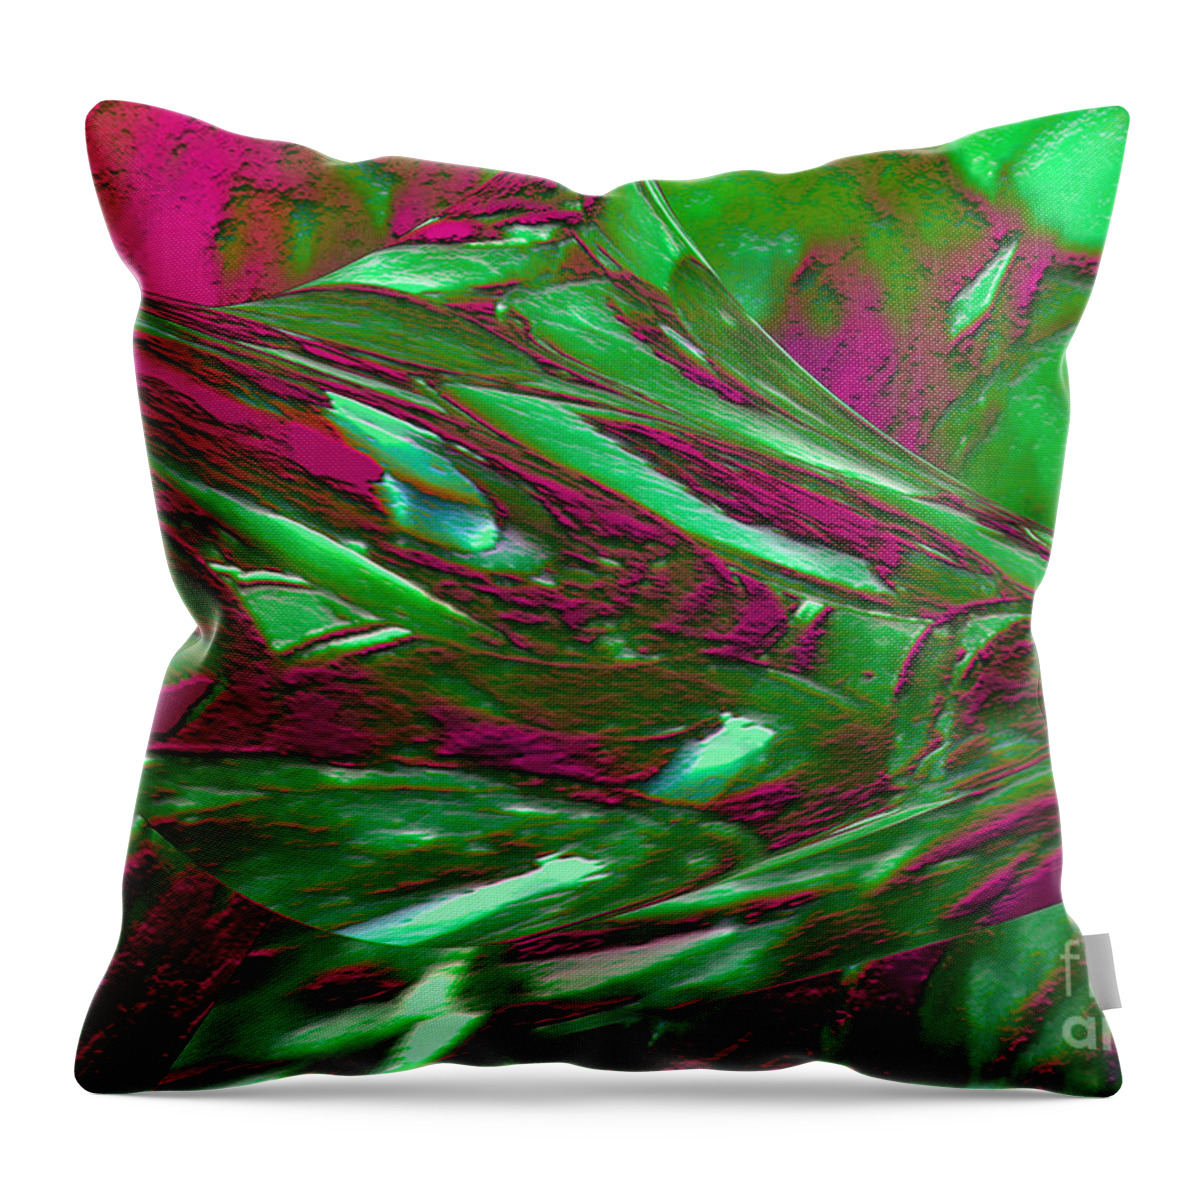 Abstract Throw Pillow featuring the painting Euphoria by Gerlinde Keating - Galleria GK Keating Associates Inc